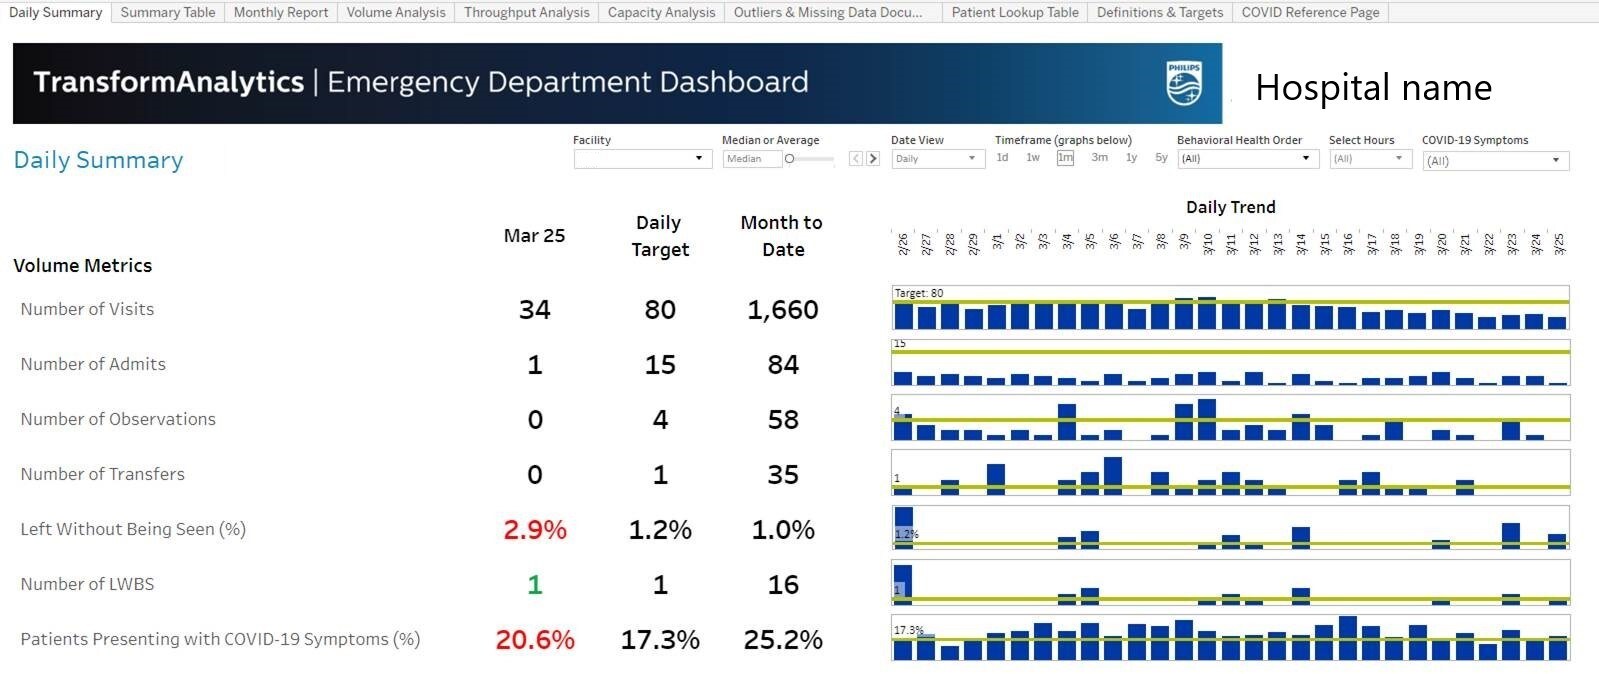 dashboard_daily_trend (opens in a new window) download image